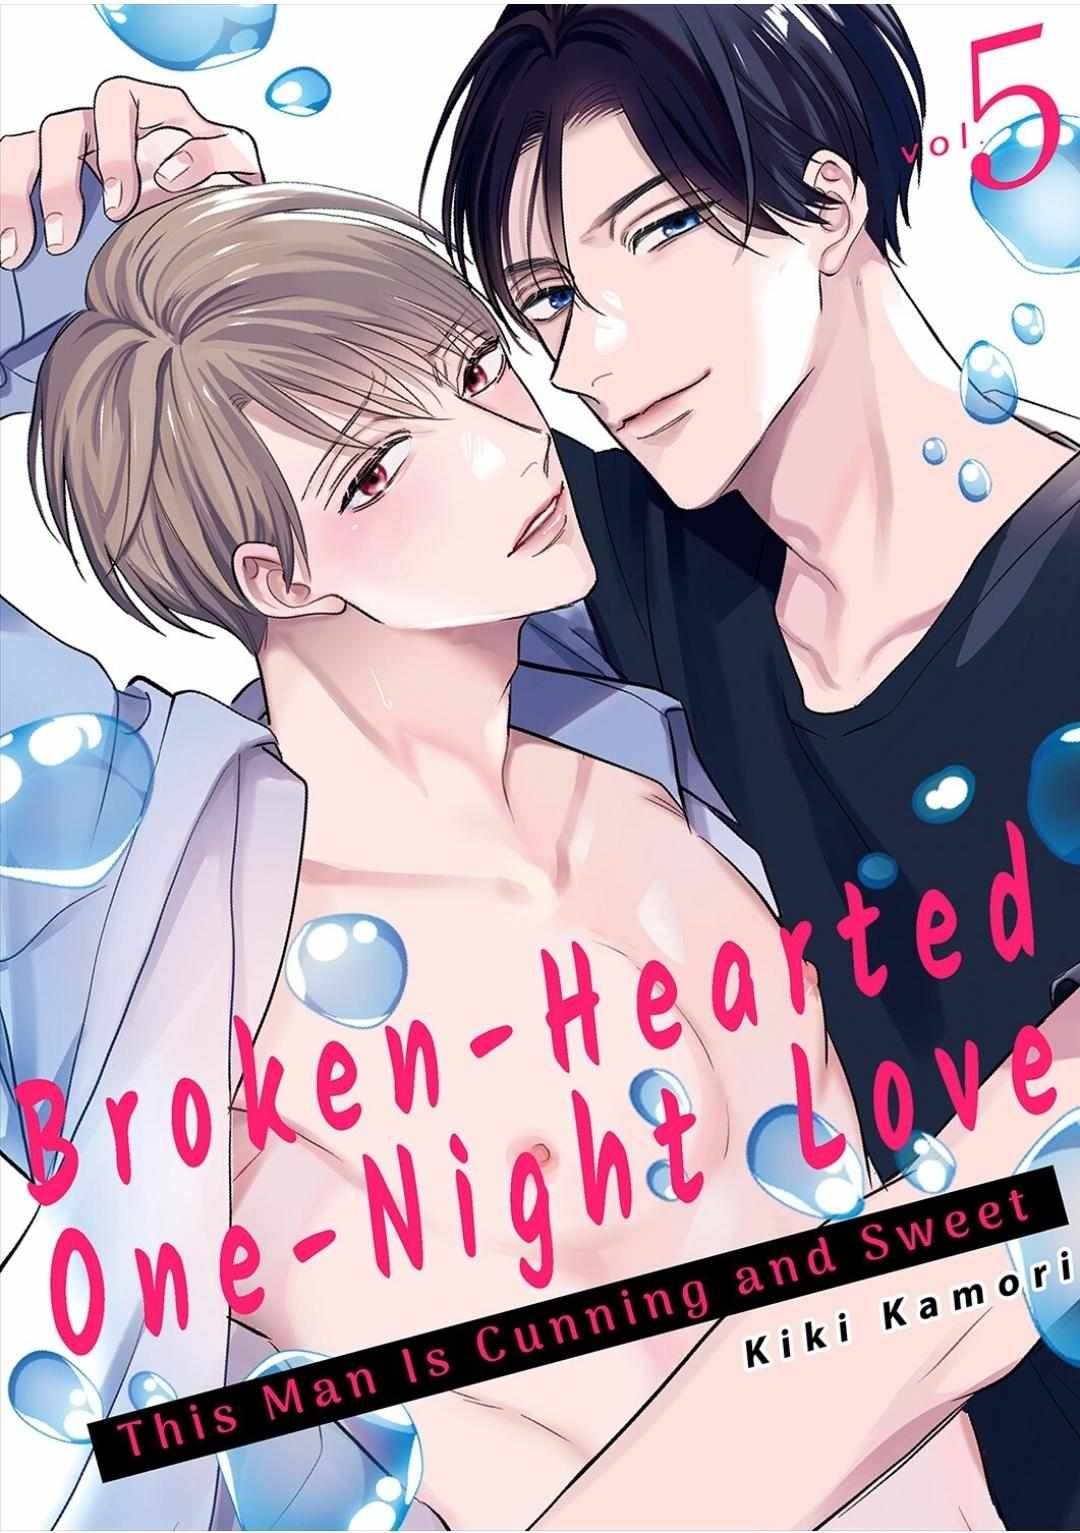 Broken-Hearted One-Night Love ~This Man Is Cunning and Sweet~ - chapter 5 - #2